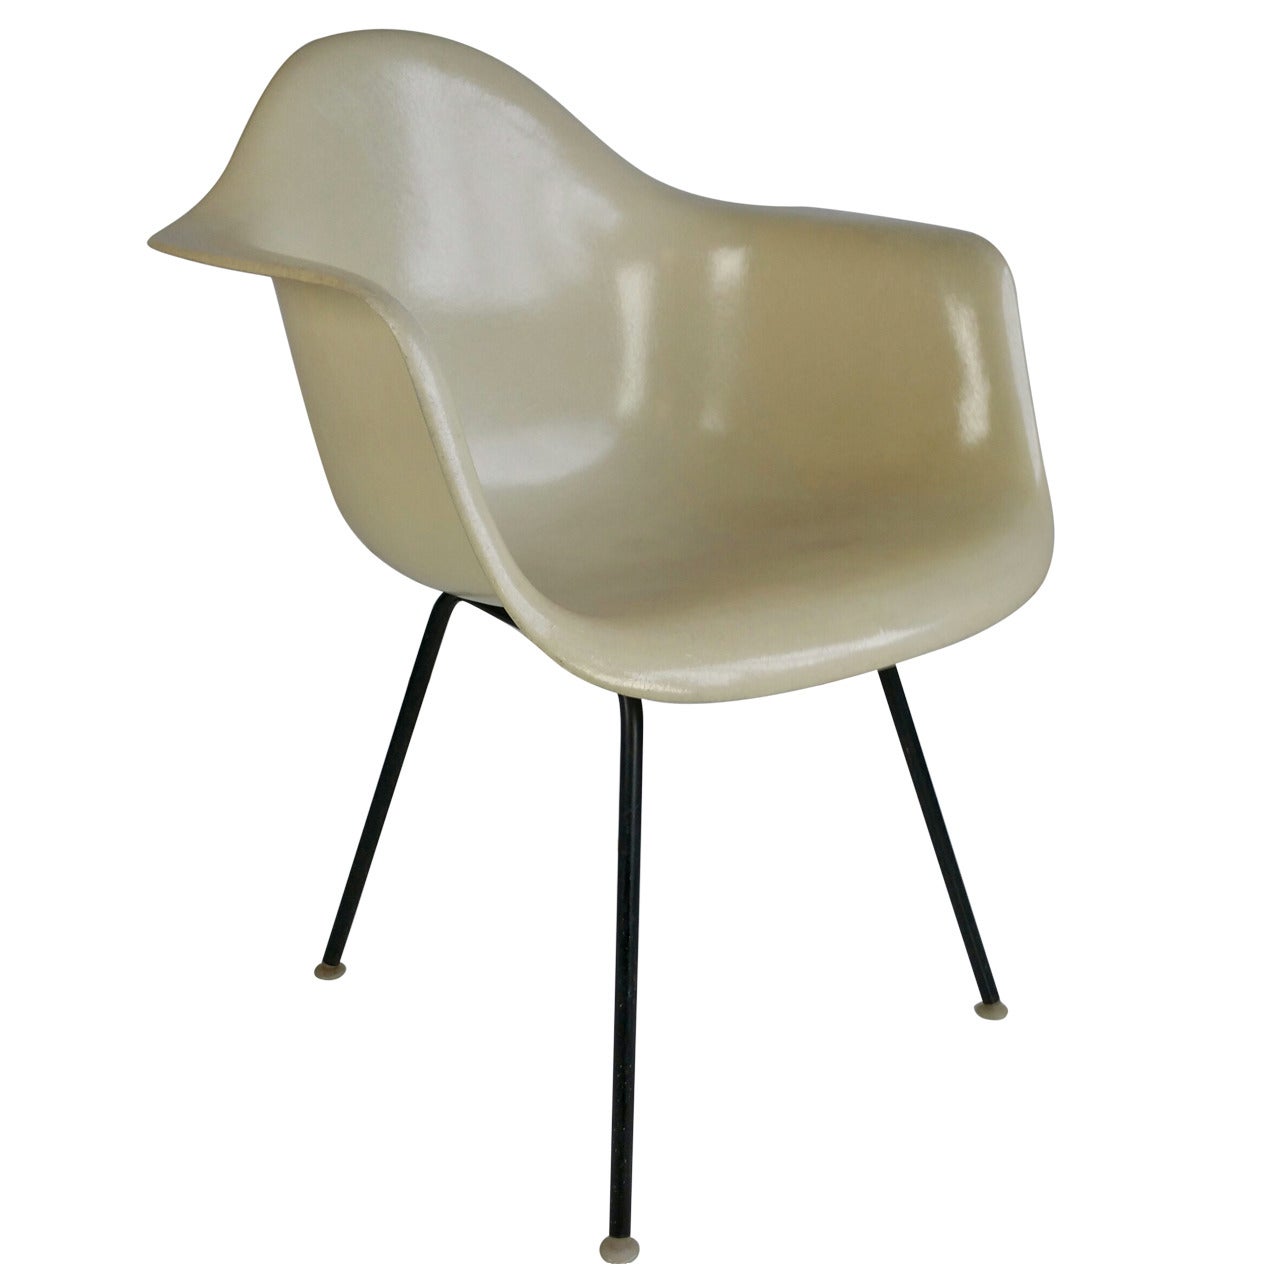 Charles Eames Parchment Arm Shell Chair, Herman Miller